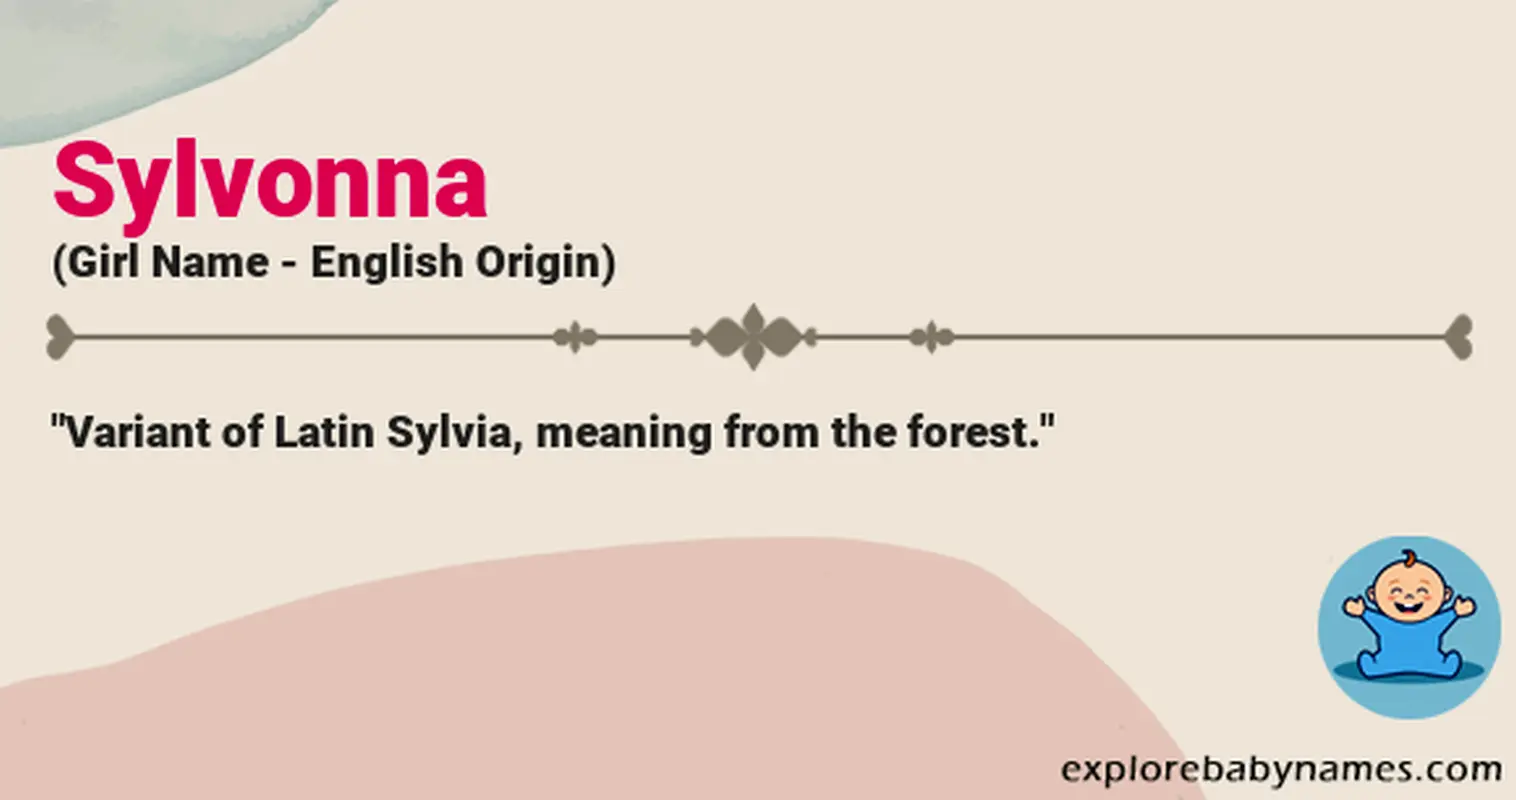 Meaning of Sylvonna